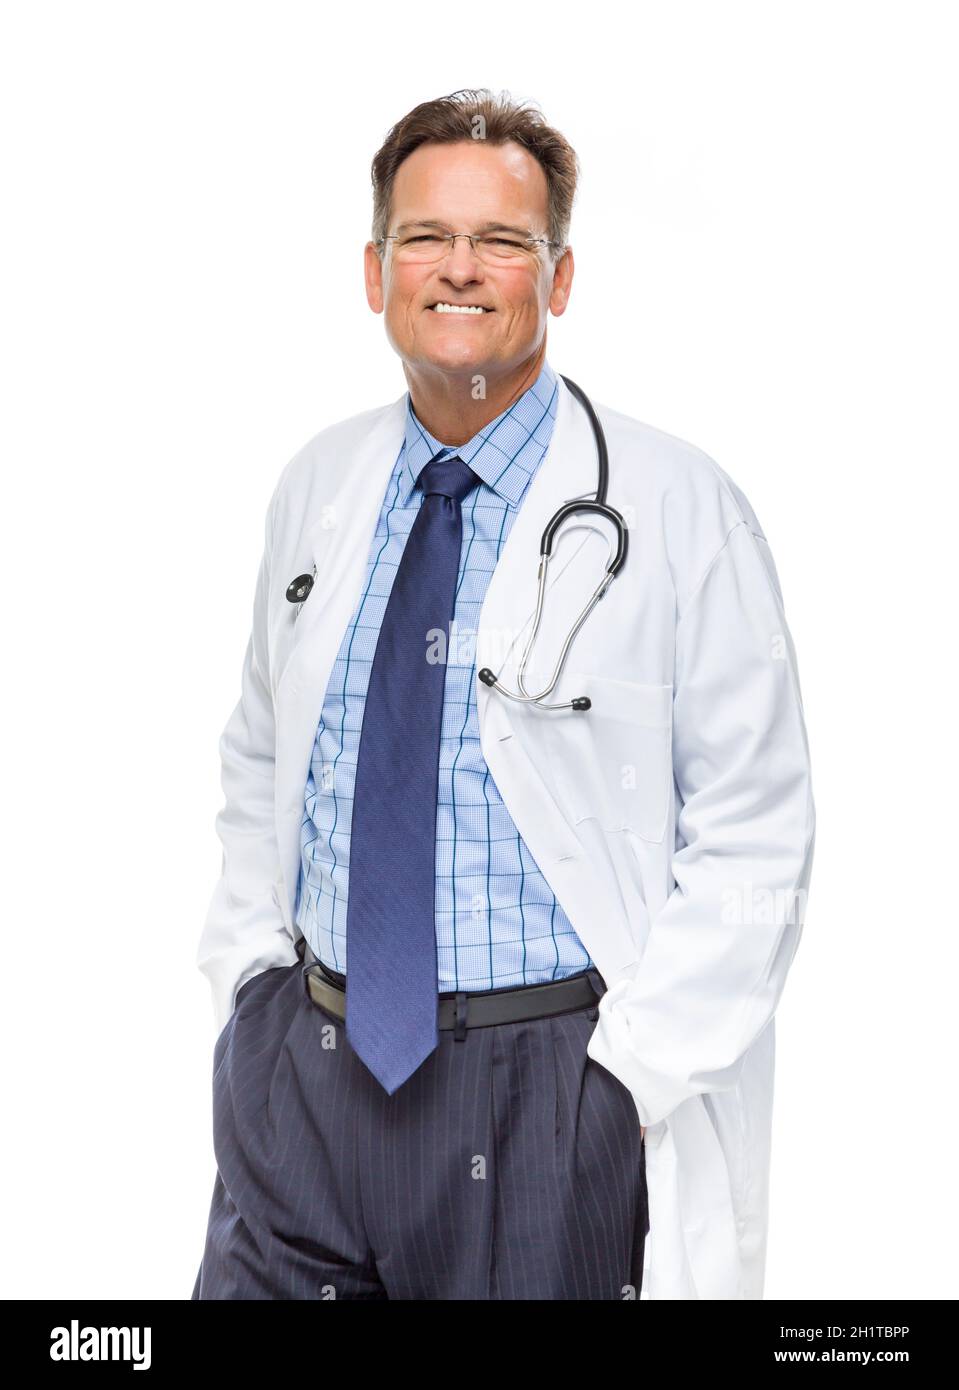 Handsome Smiling Male Doctor in Lab Coat with Stethoscope Isolated on a White Background. Stock Photo